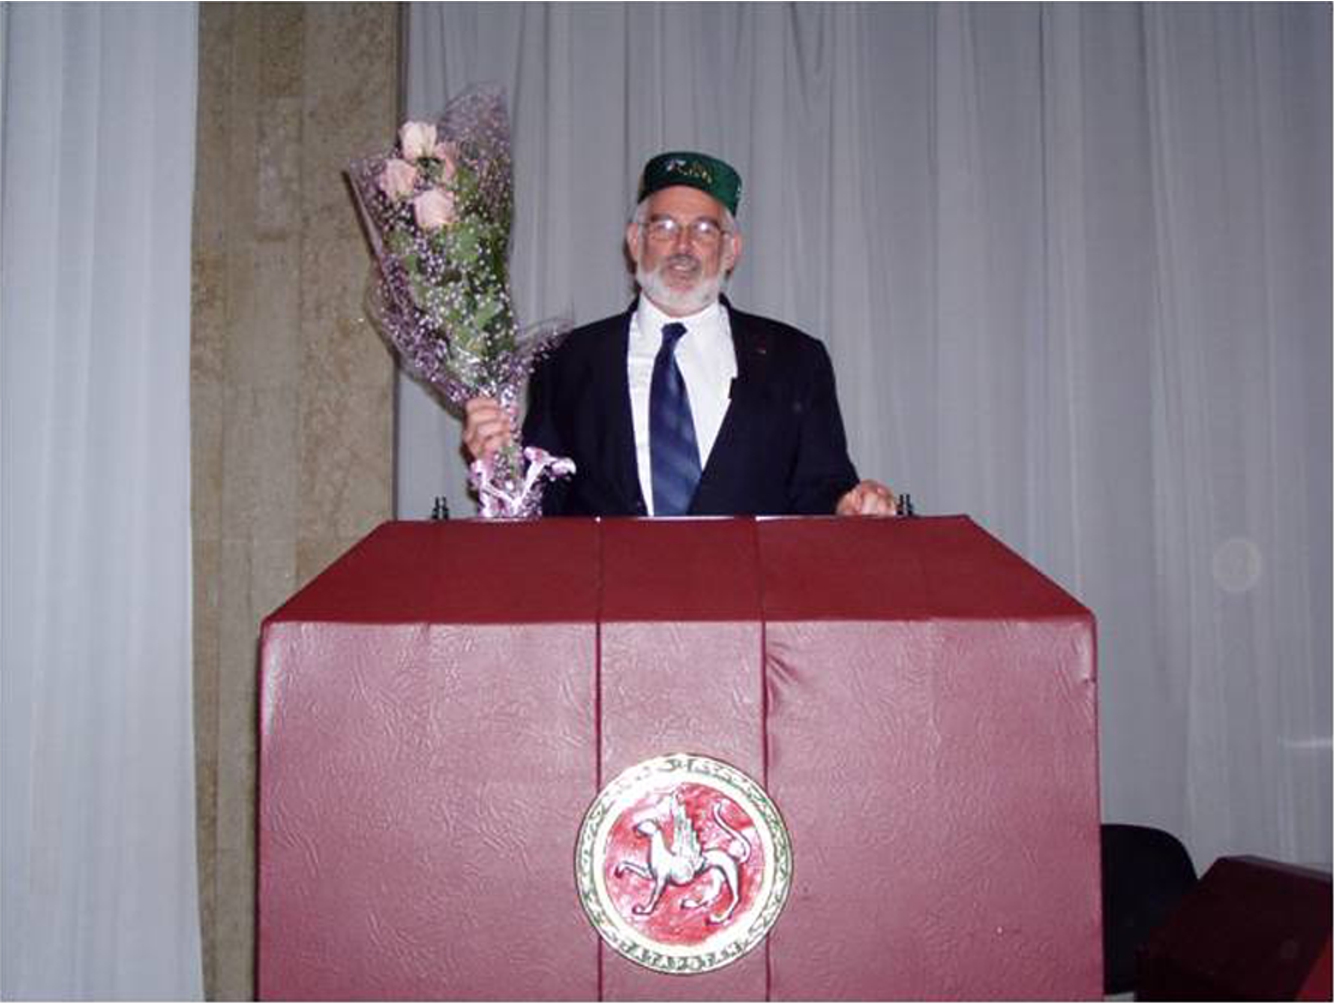 Lawrence Berliner at the Zavoisky Award ceremony in Kazan, the capital of Tatarstan which sponsored the event. This annual Prize ceremony commemorates the contributions made by Yevgeny Zavoisky, from Kazan State University, who is regarded as the father of ESR. Photograph provided by Lawrence Berliner.